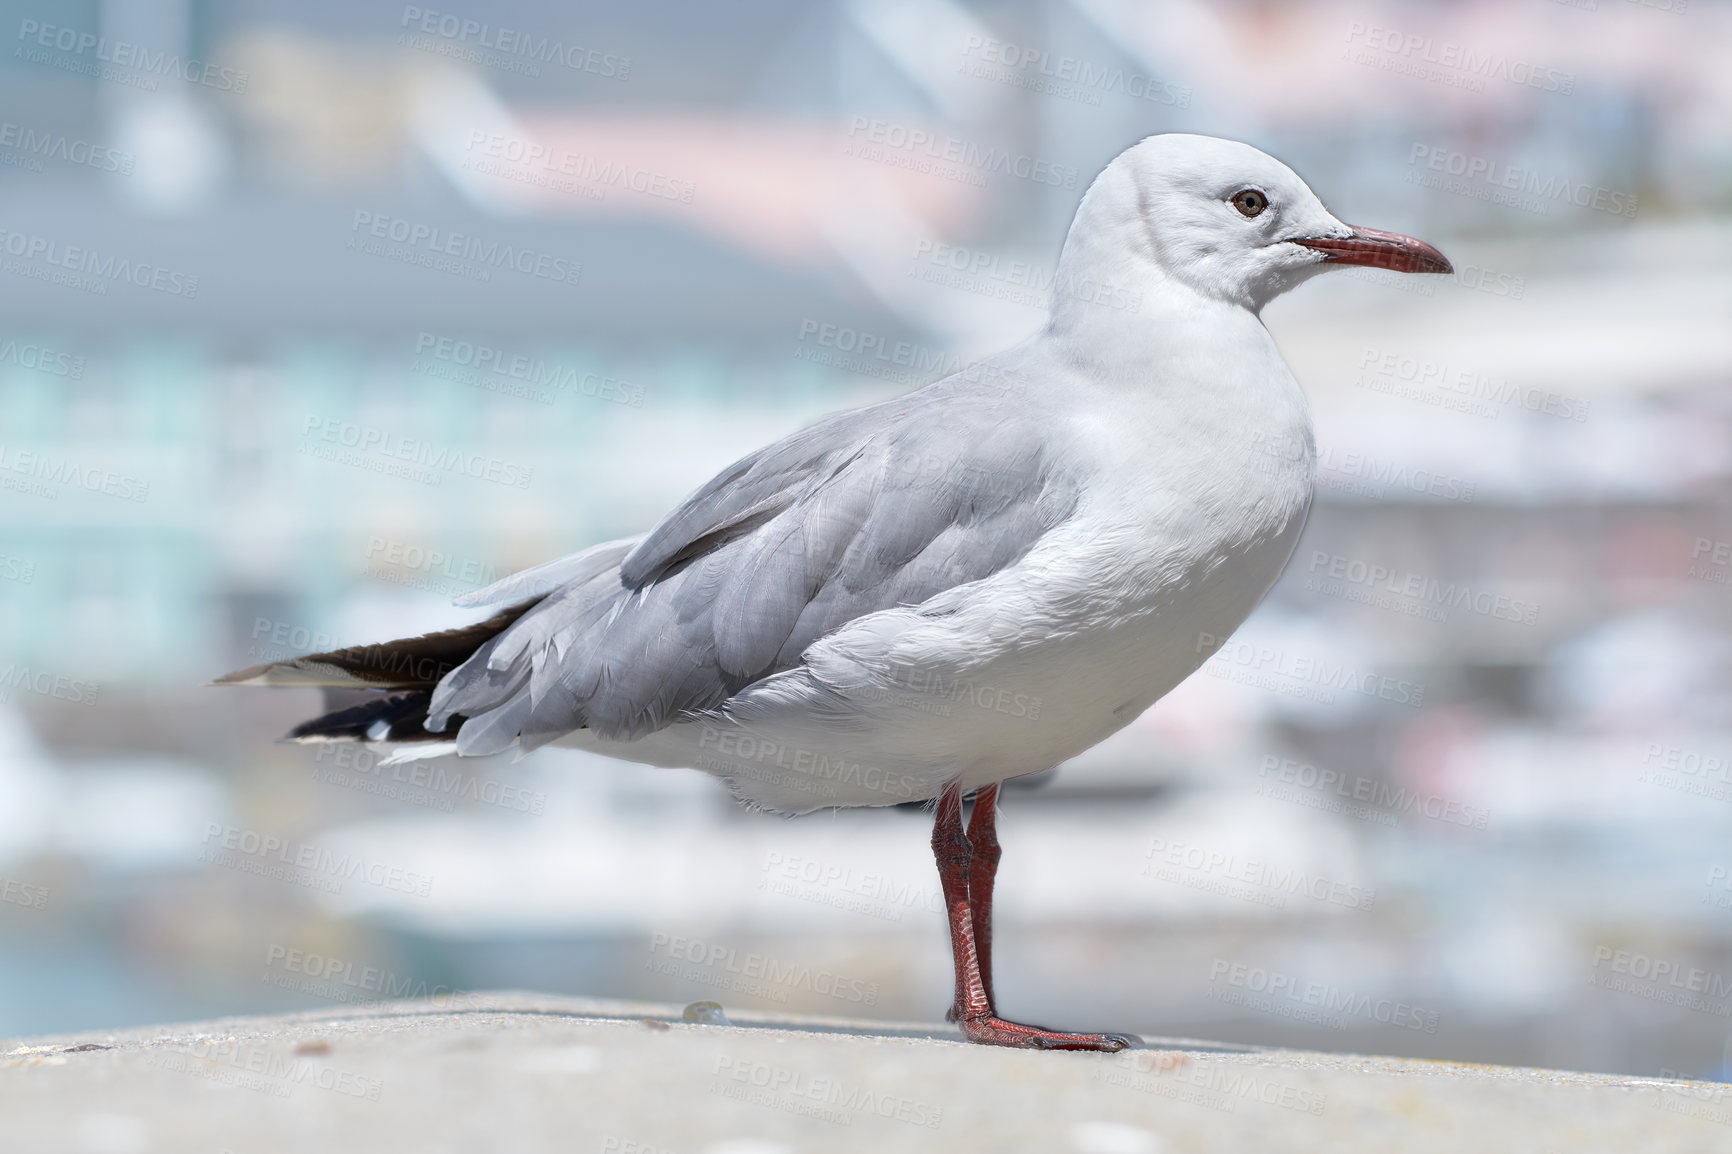 Buy stock photo A seagull bird standing on a city dock or pier against a blurred background with copy space. Closeup birdwatching of a white, grey red billed gull with beautiful feather textures near a harbor